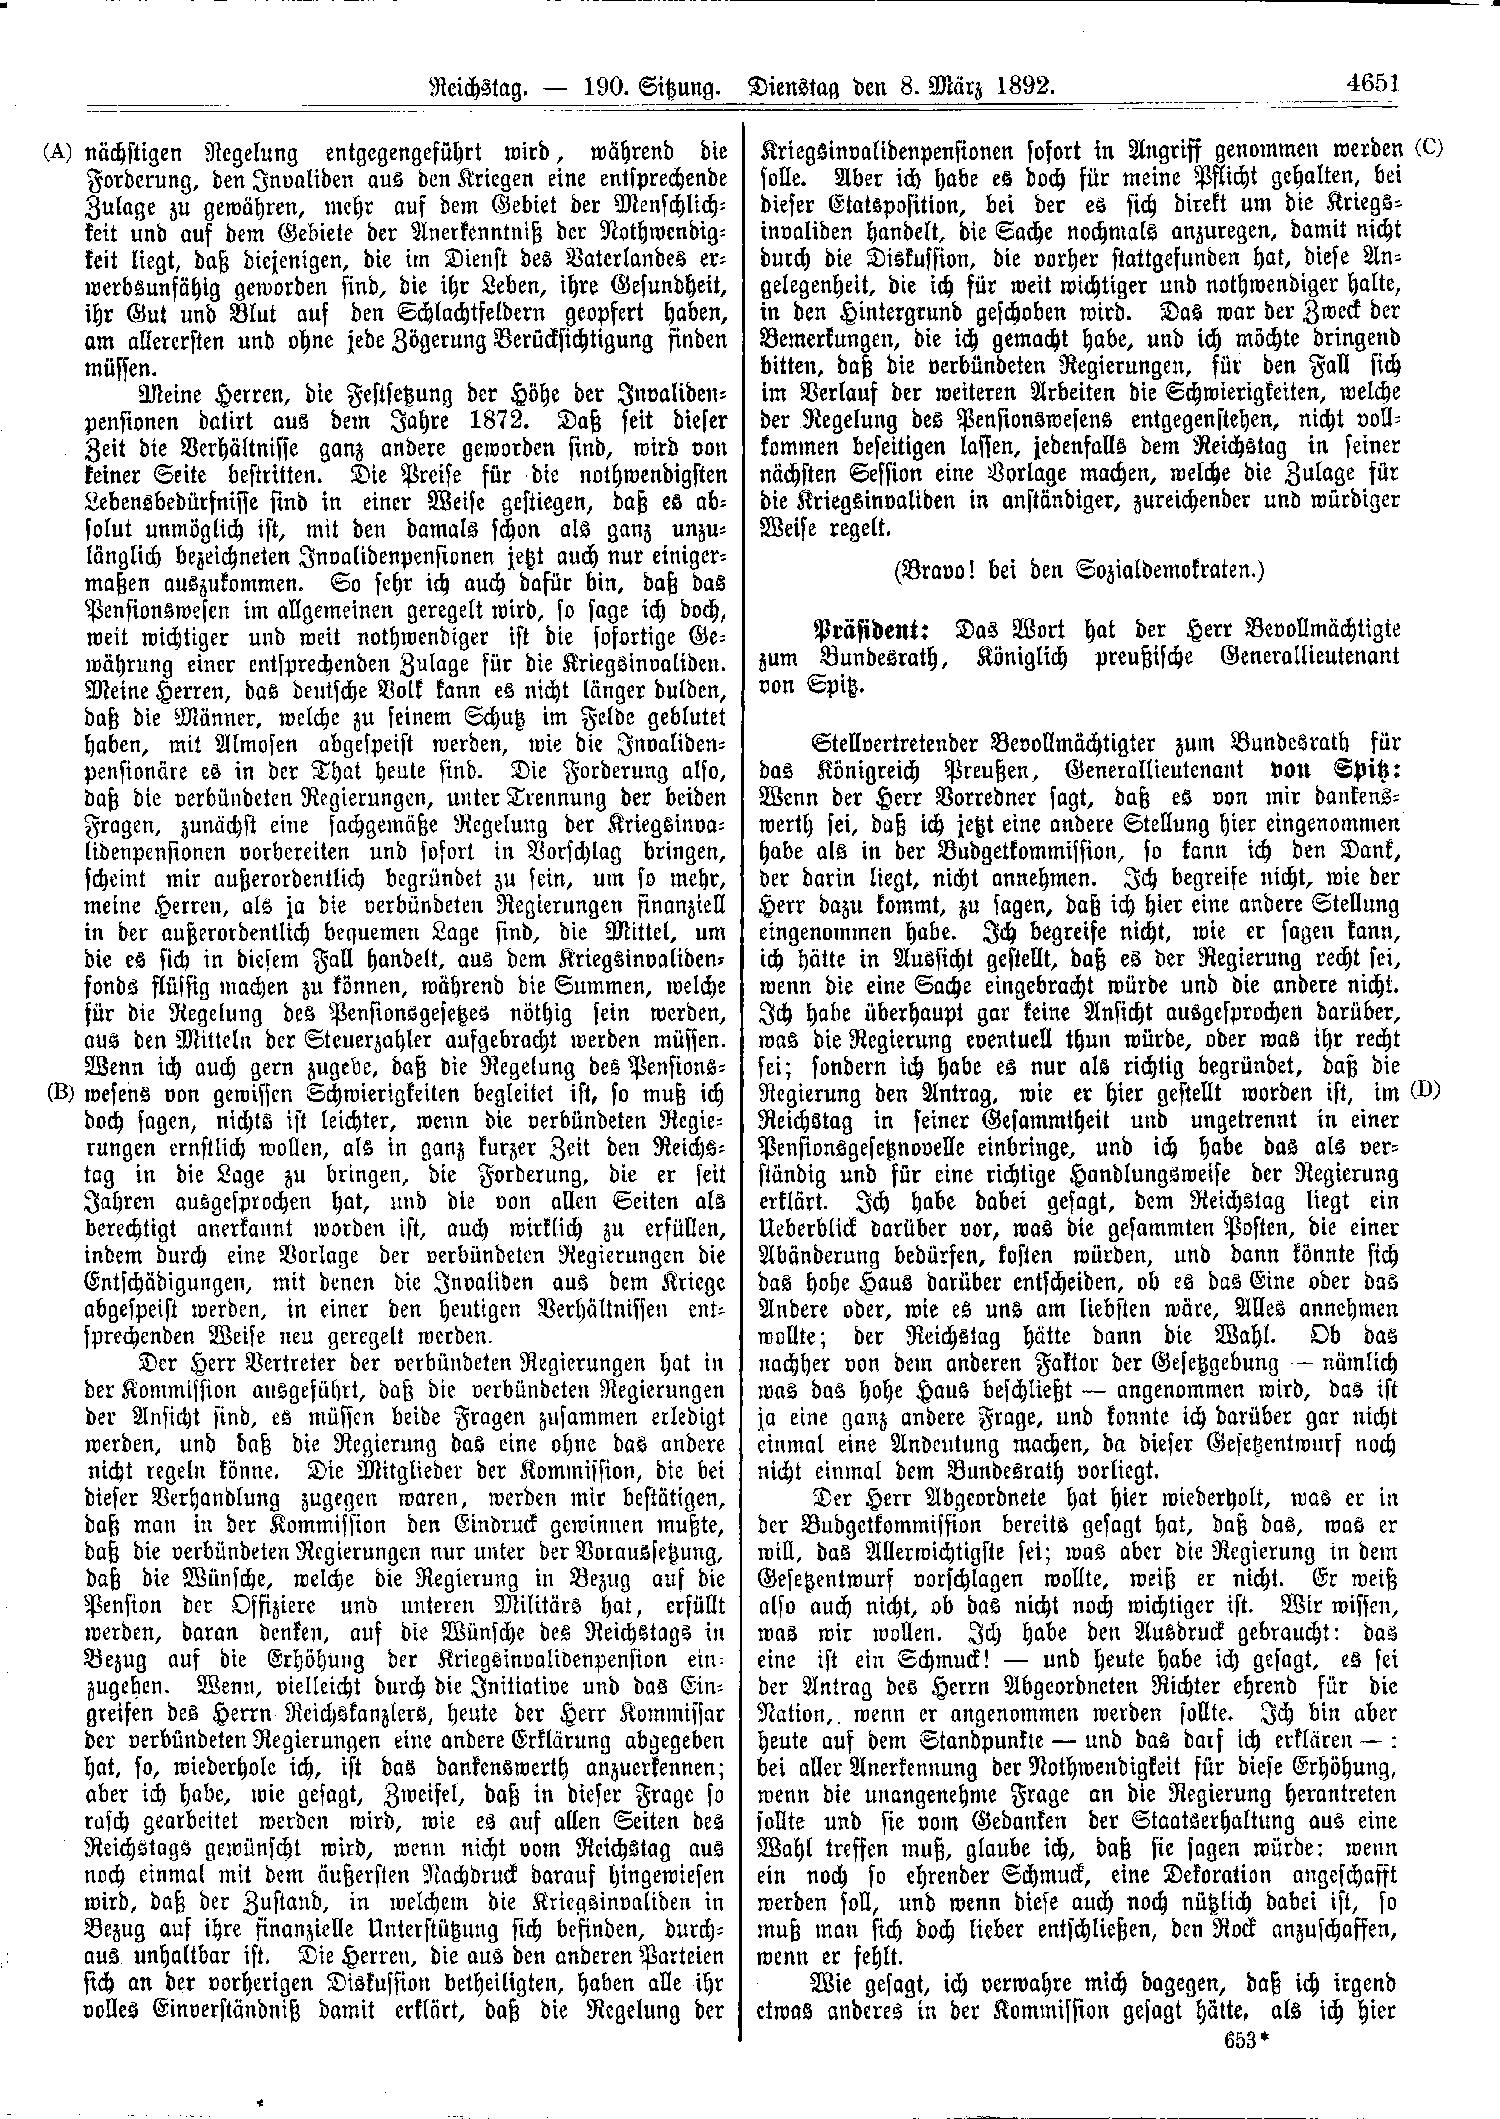 Scan of page 4651